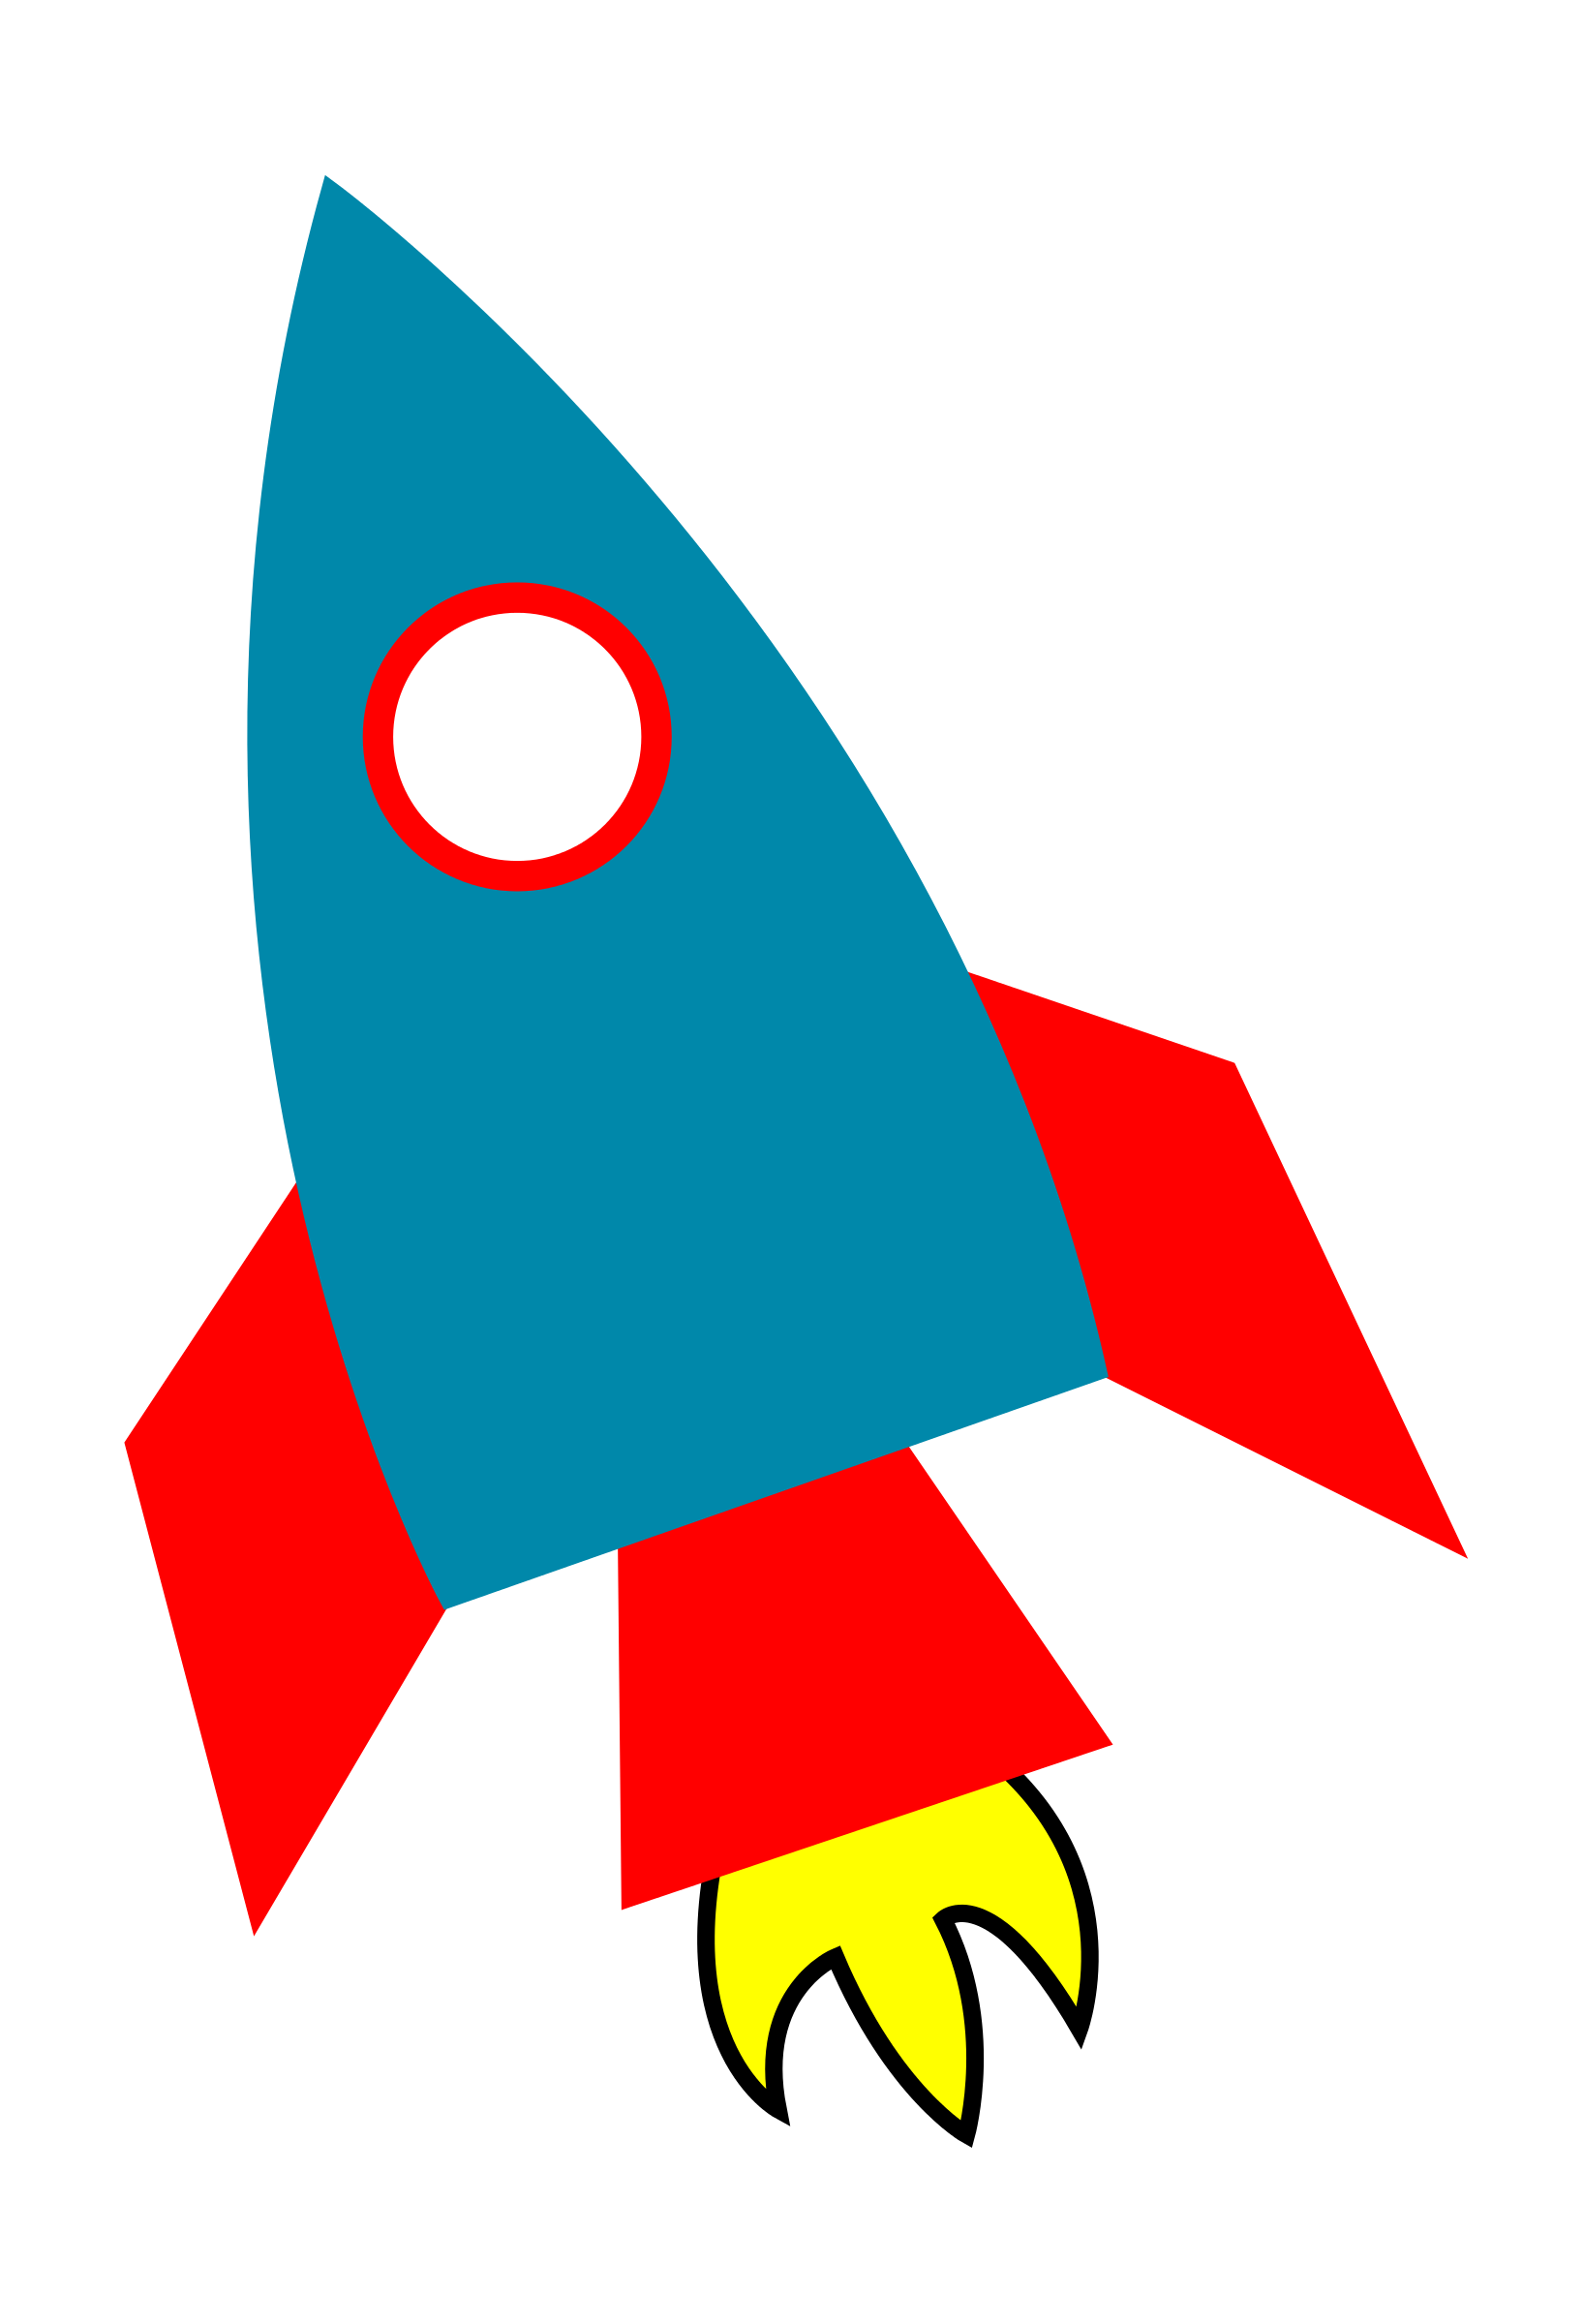 Animated rocket clipart - Cliparting.com